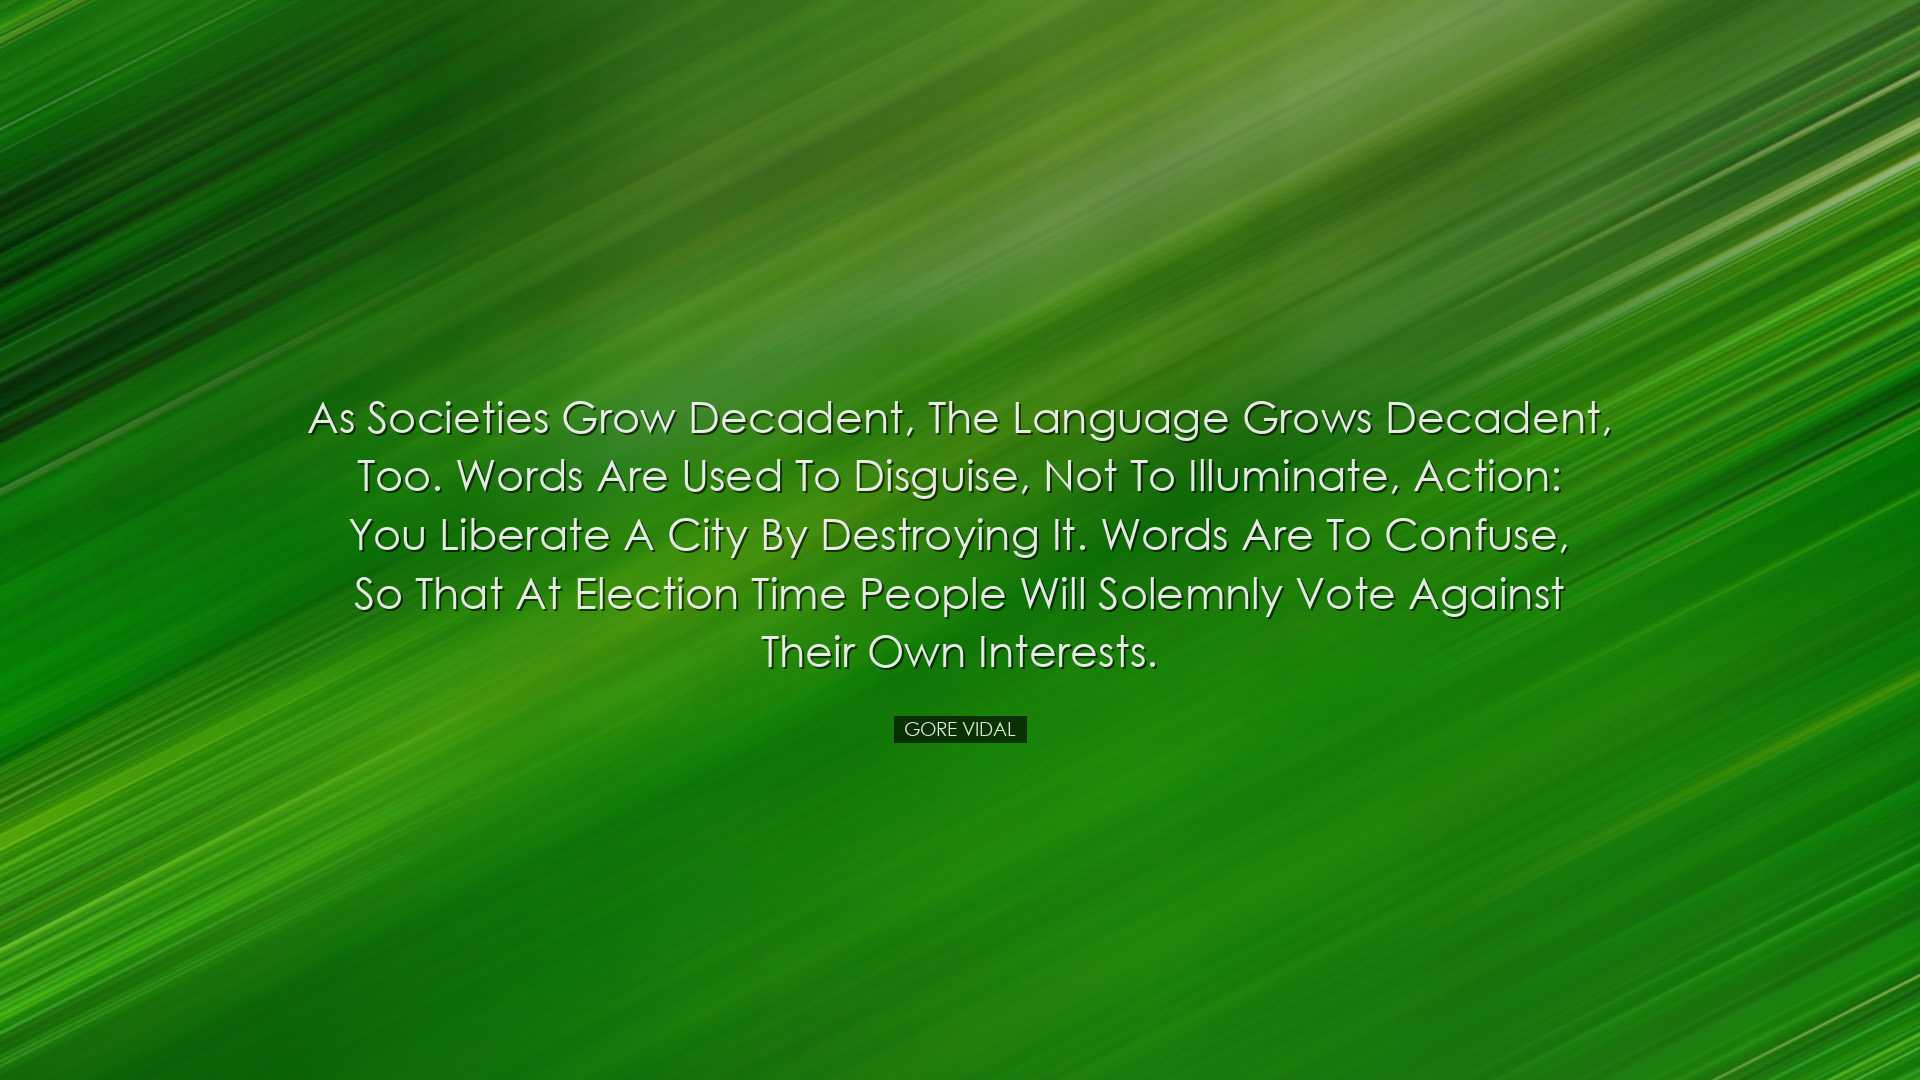 As societies grow decadent, the language grows decadent, too. Word